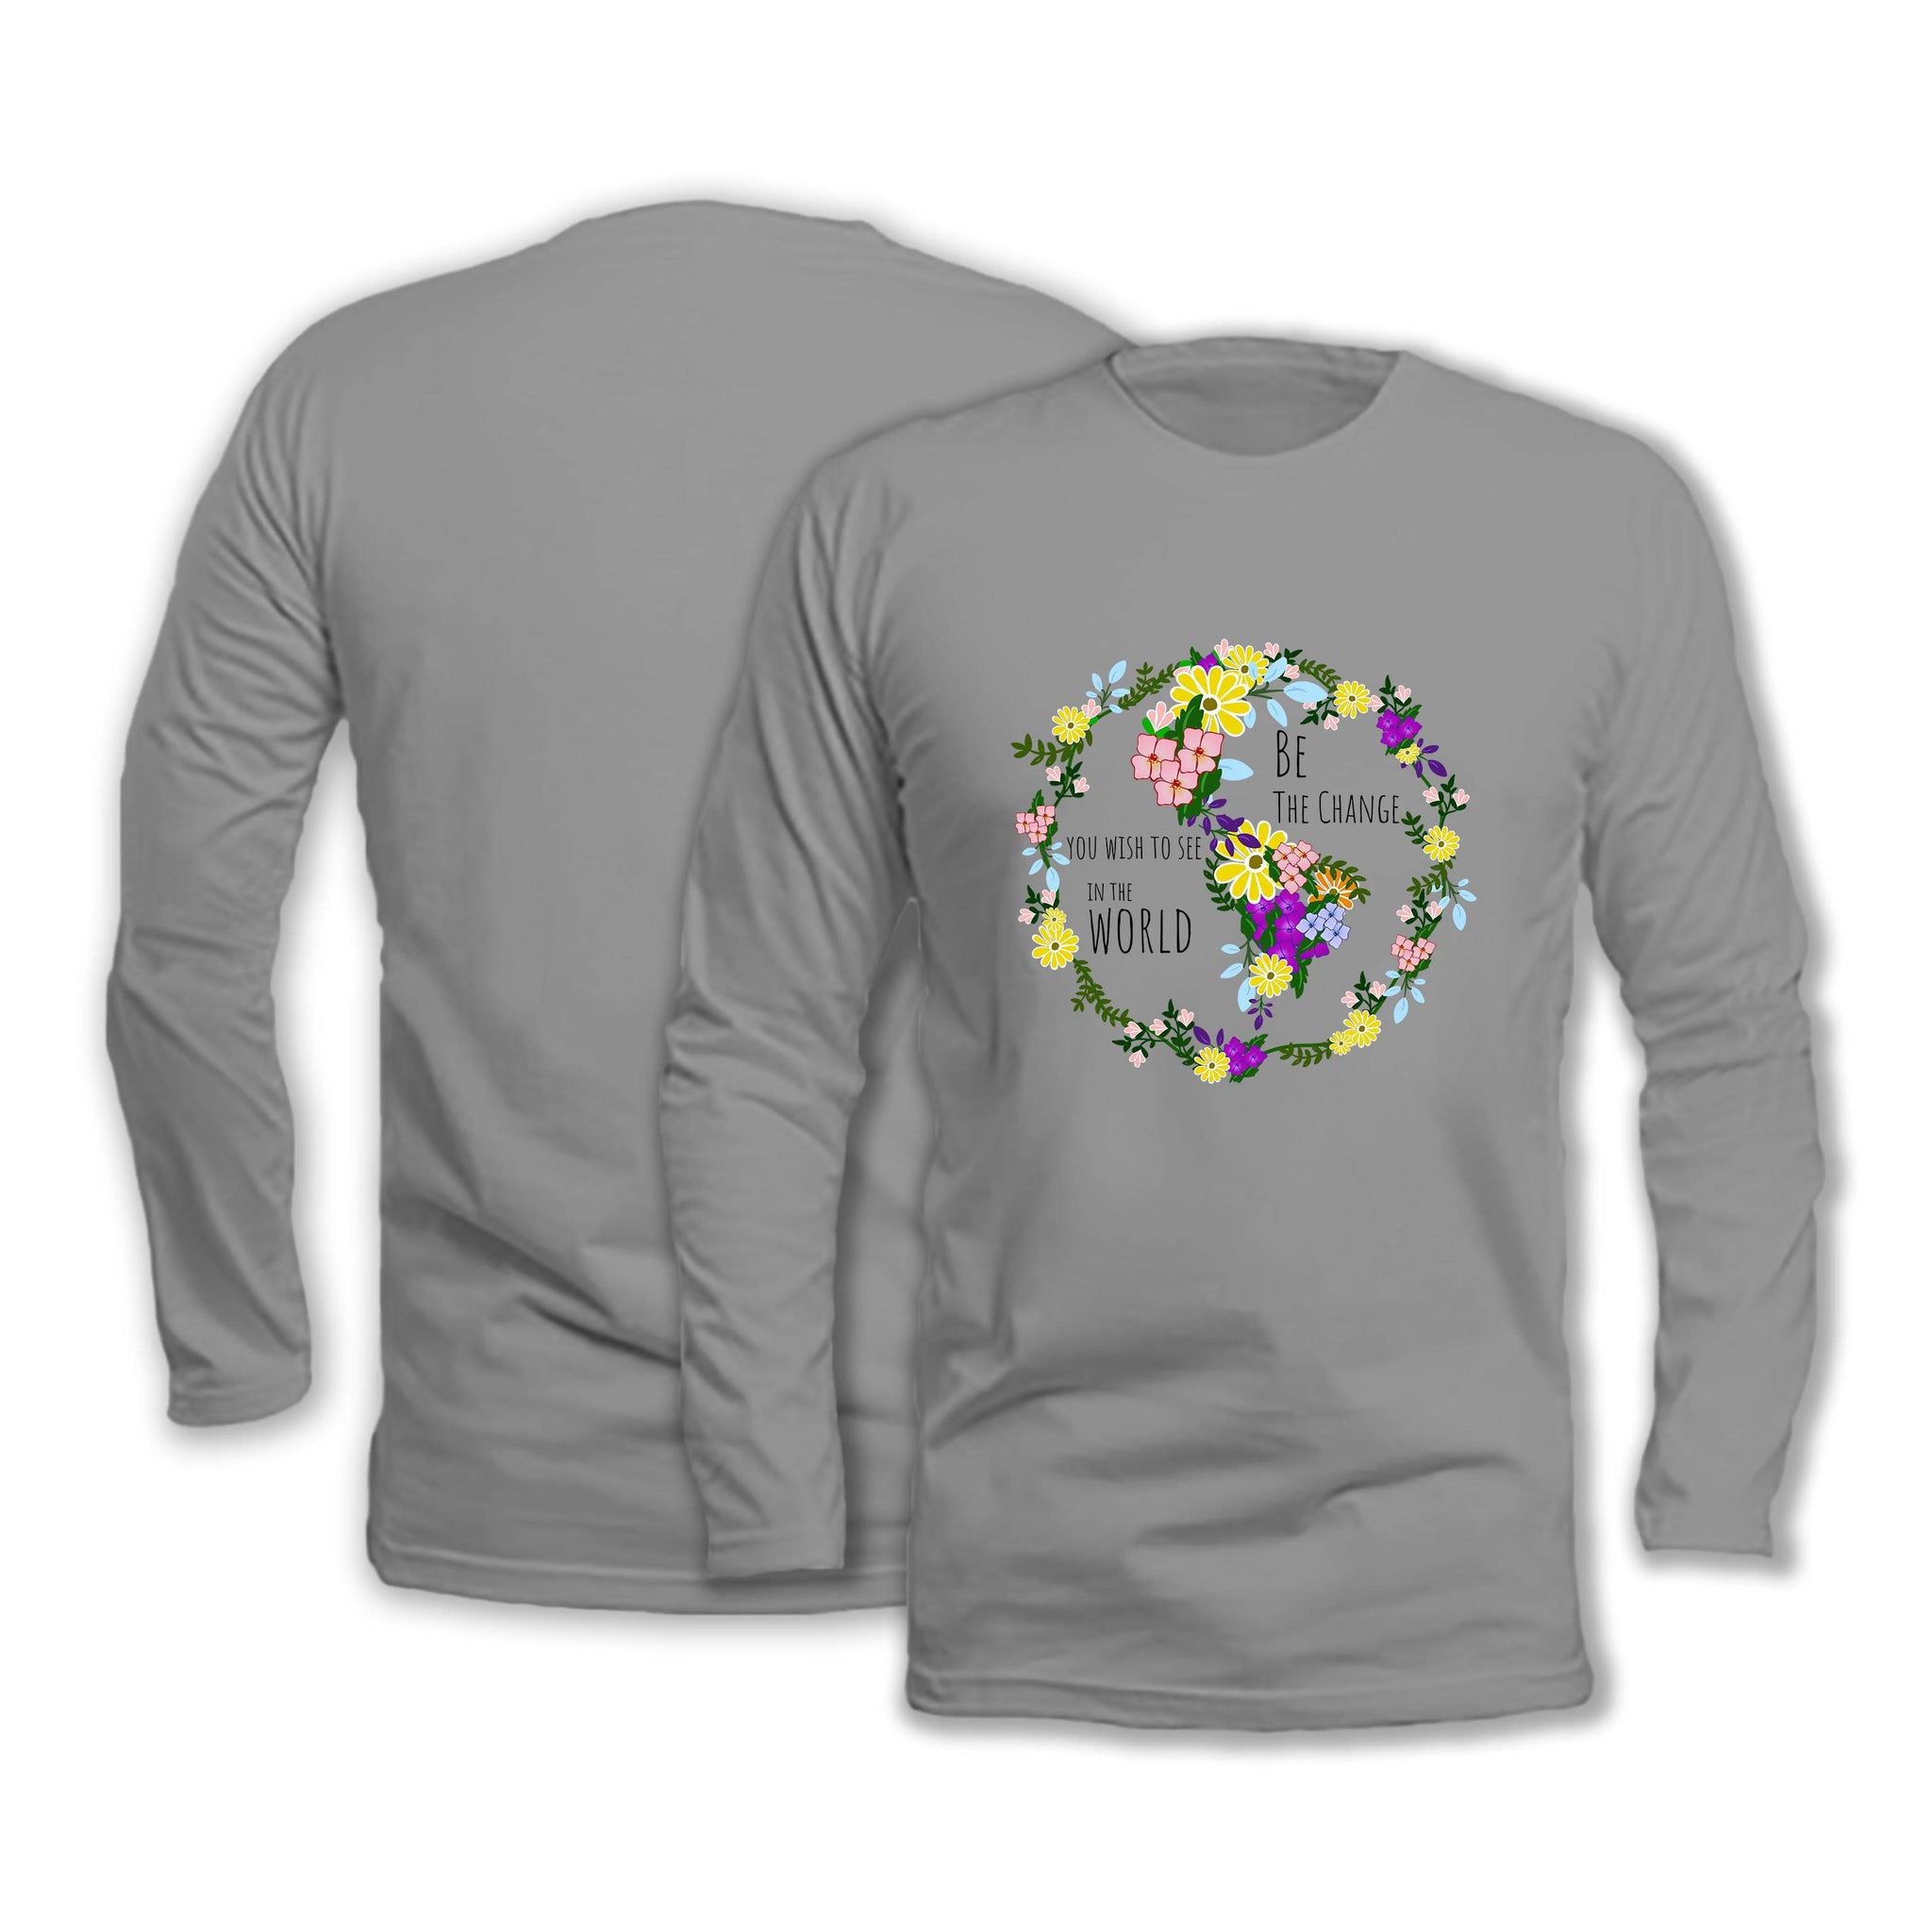 Be The Change - Long Sleeve Organic Cotton T-Shirt - One Choice Apparel